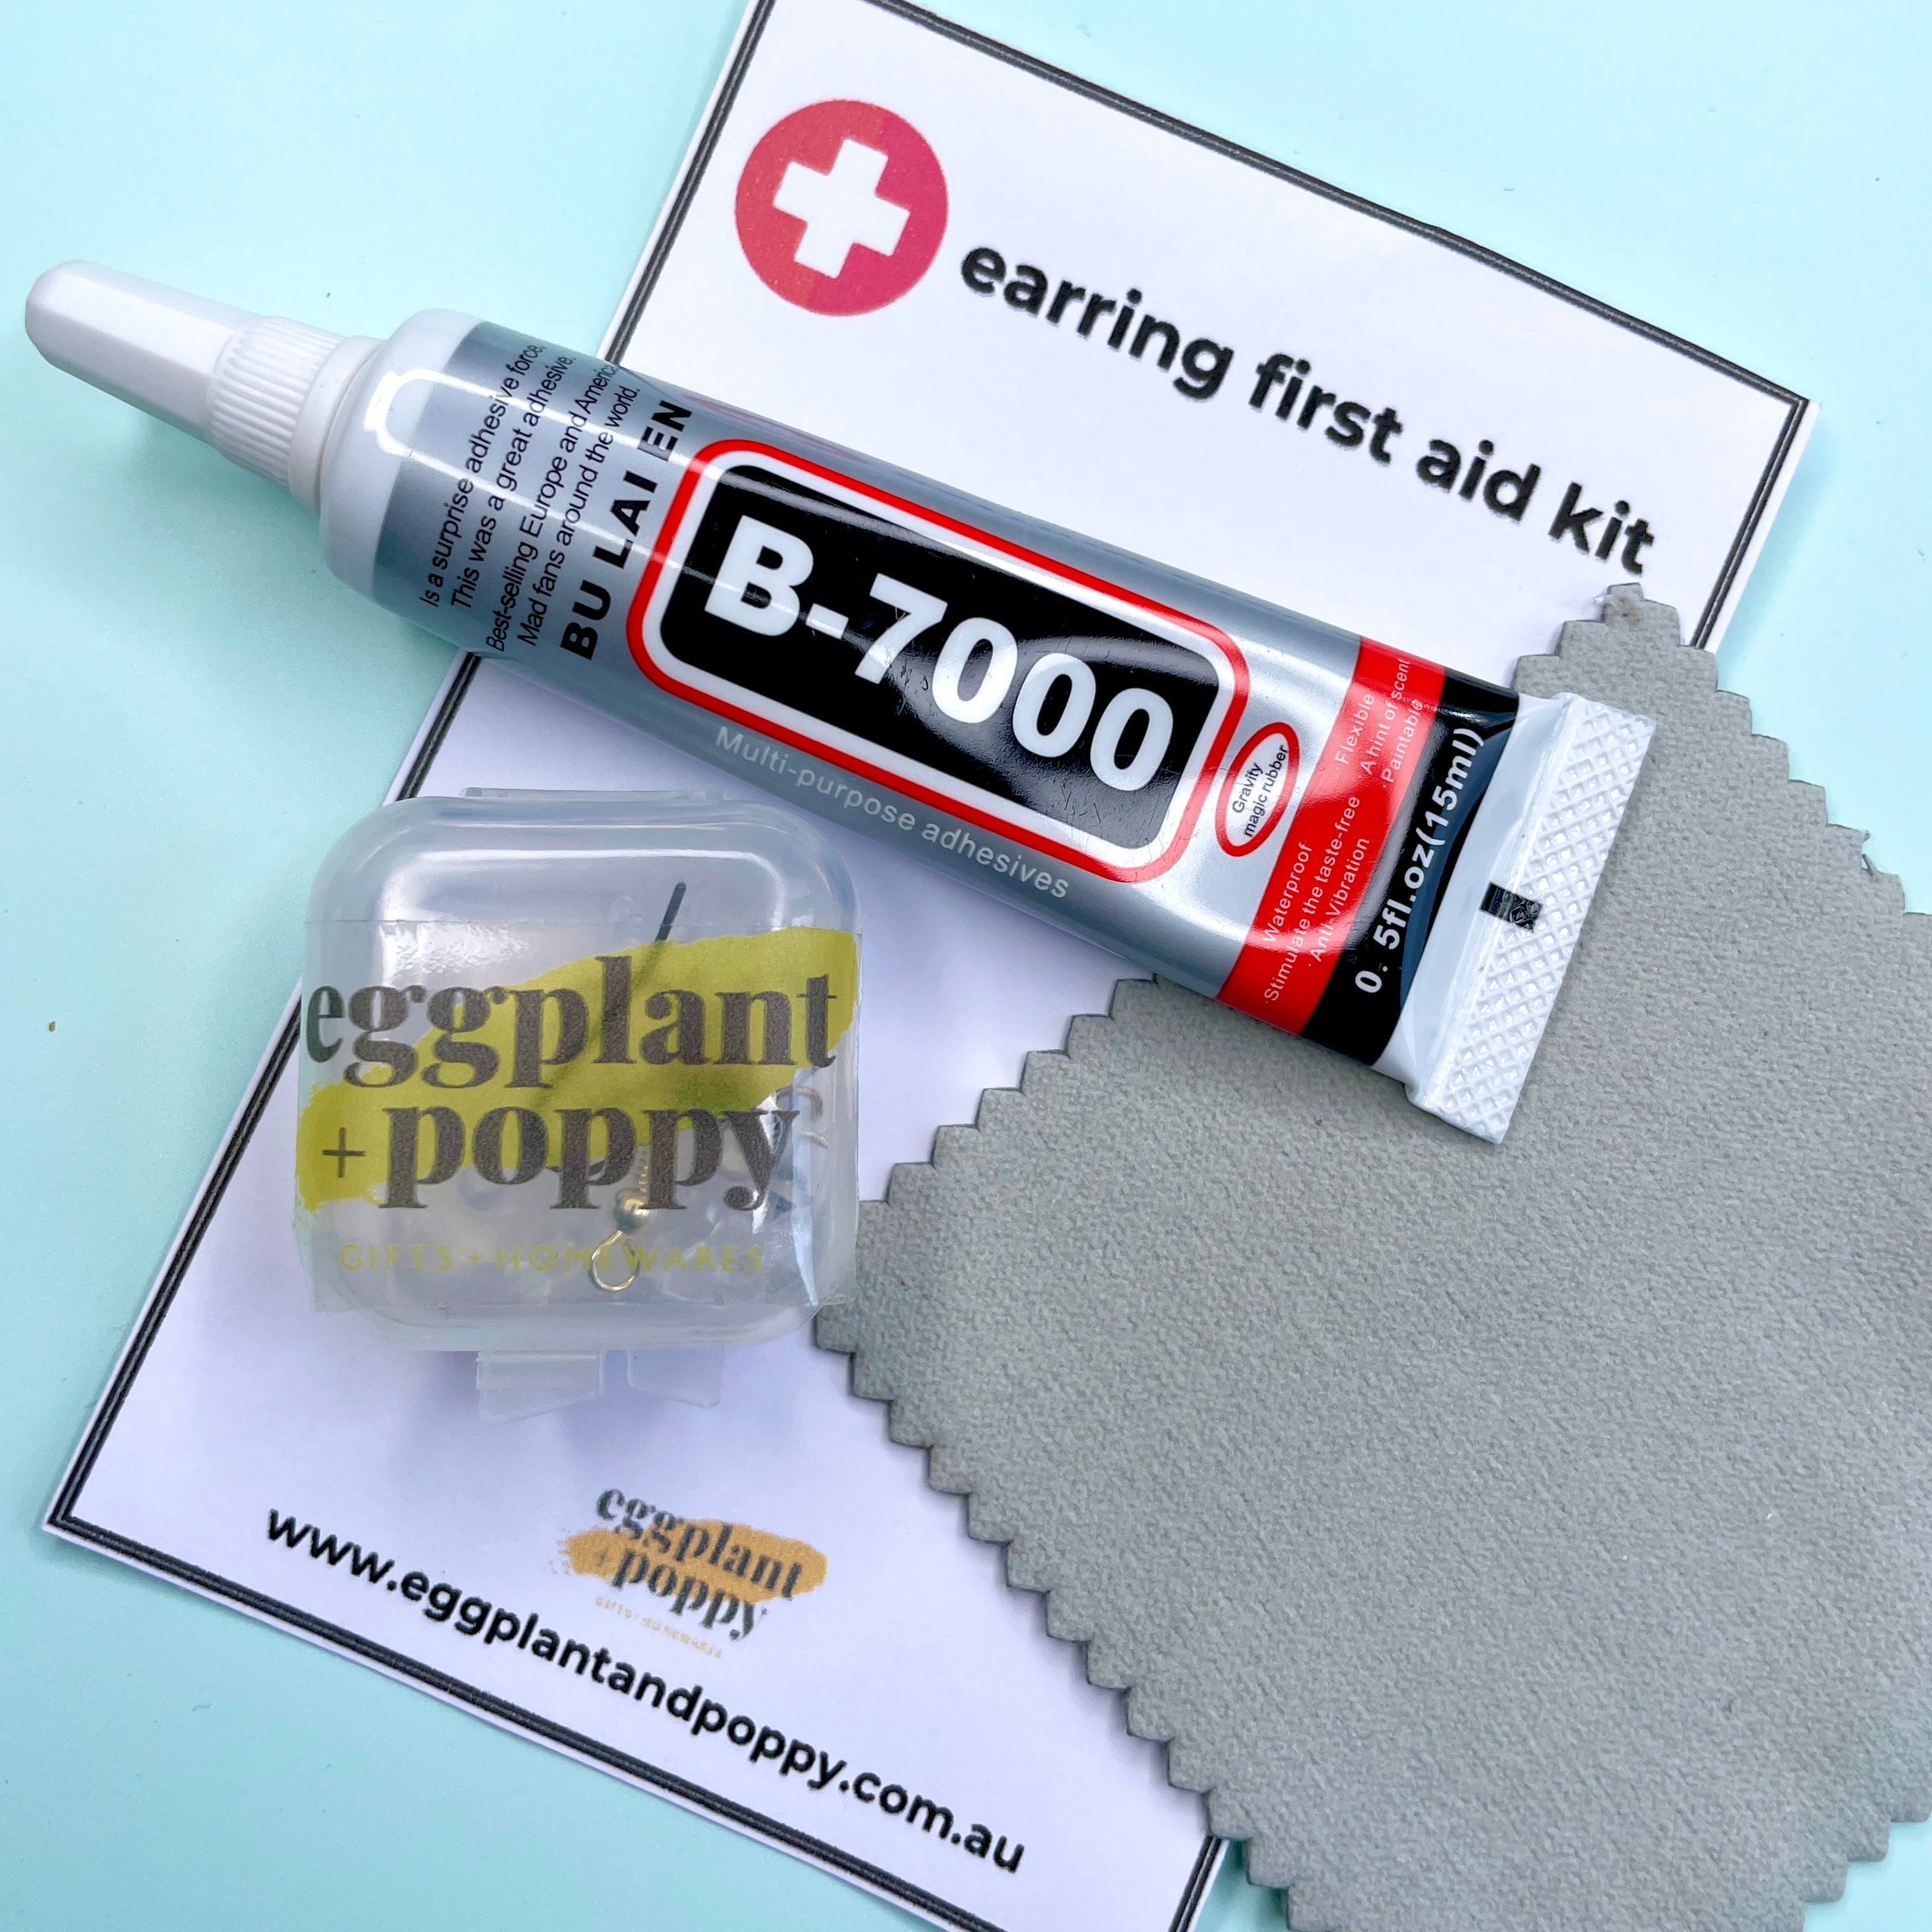 Earring First Aid Kit